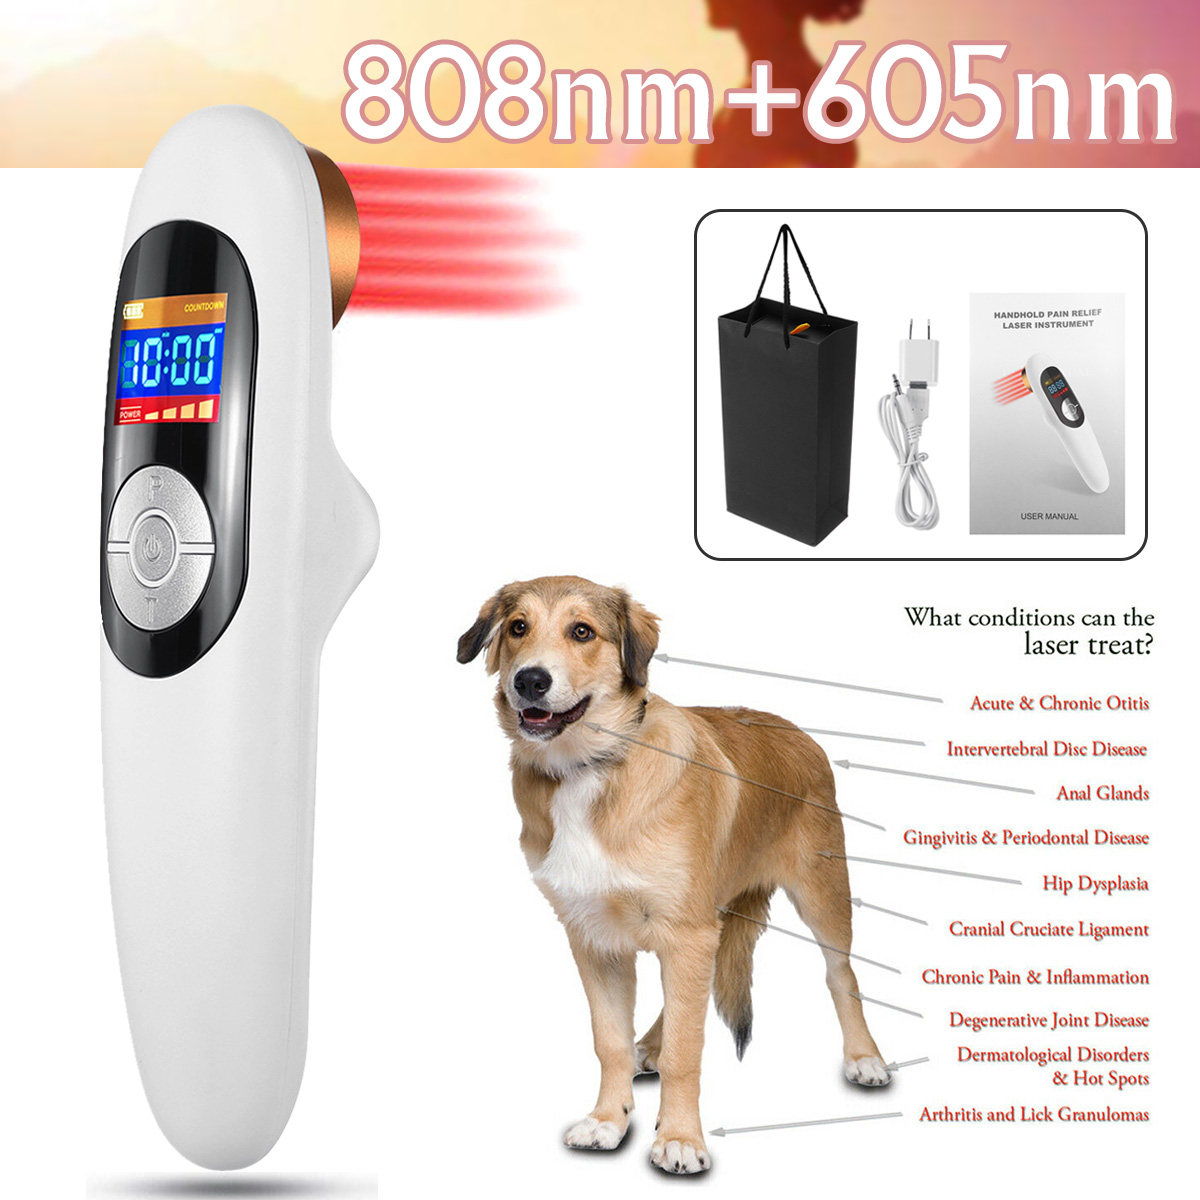 650nm 808nm Laser Therapy Device For Pain Relief